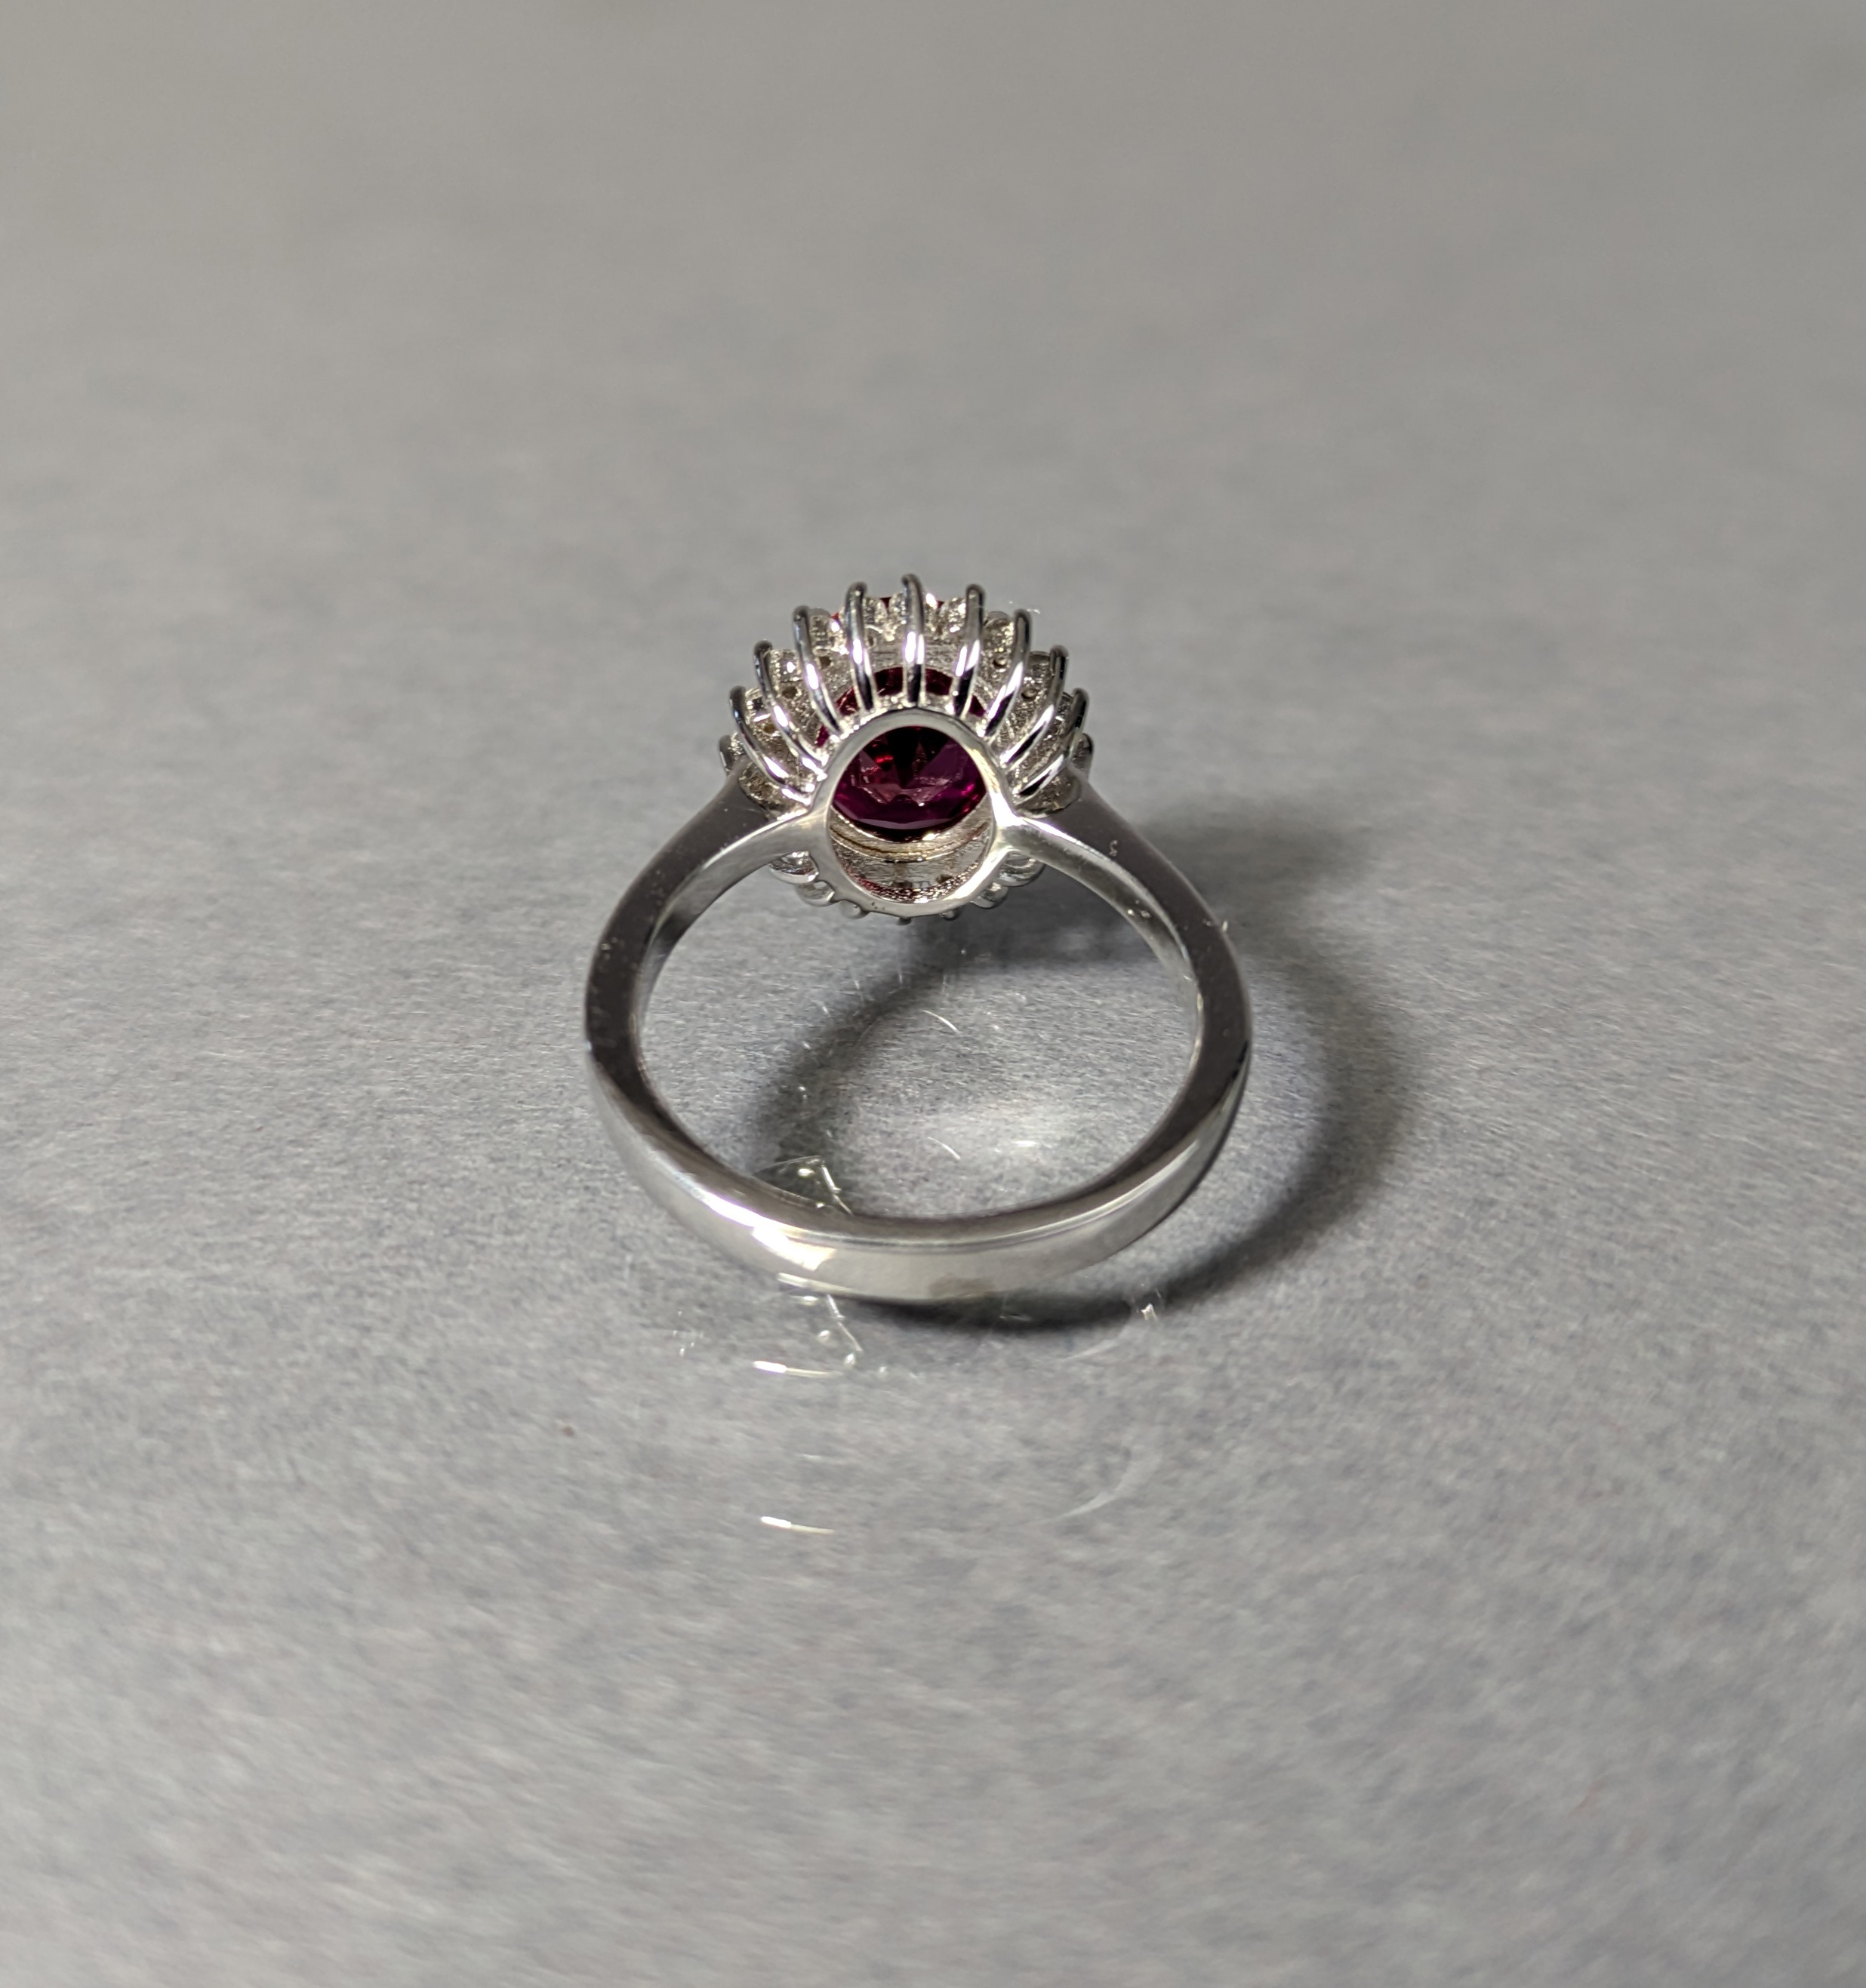 A dress ring set oval-cut cubic zirconium of deep red colour, within a border of small white stones, - Image 3 of 3